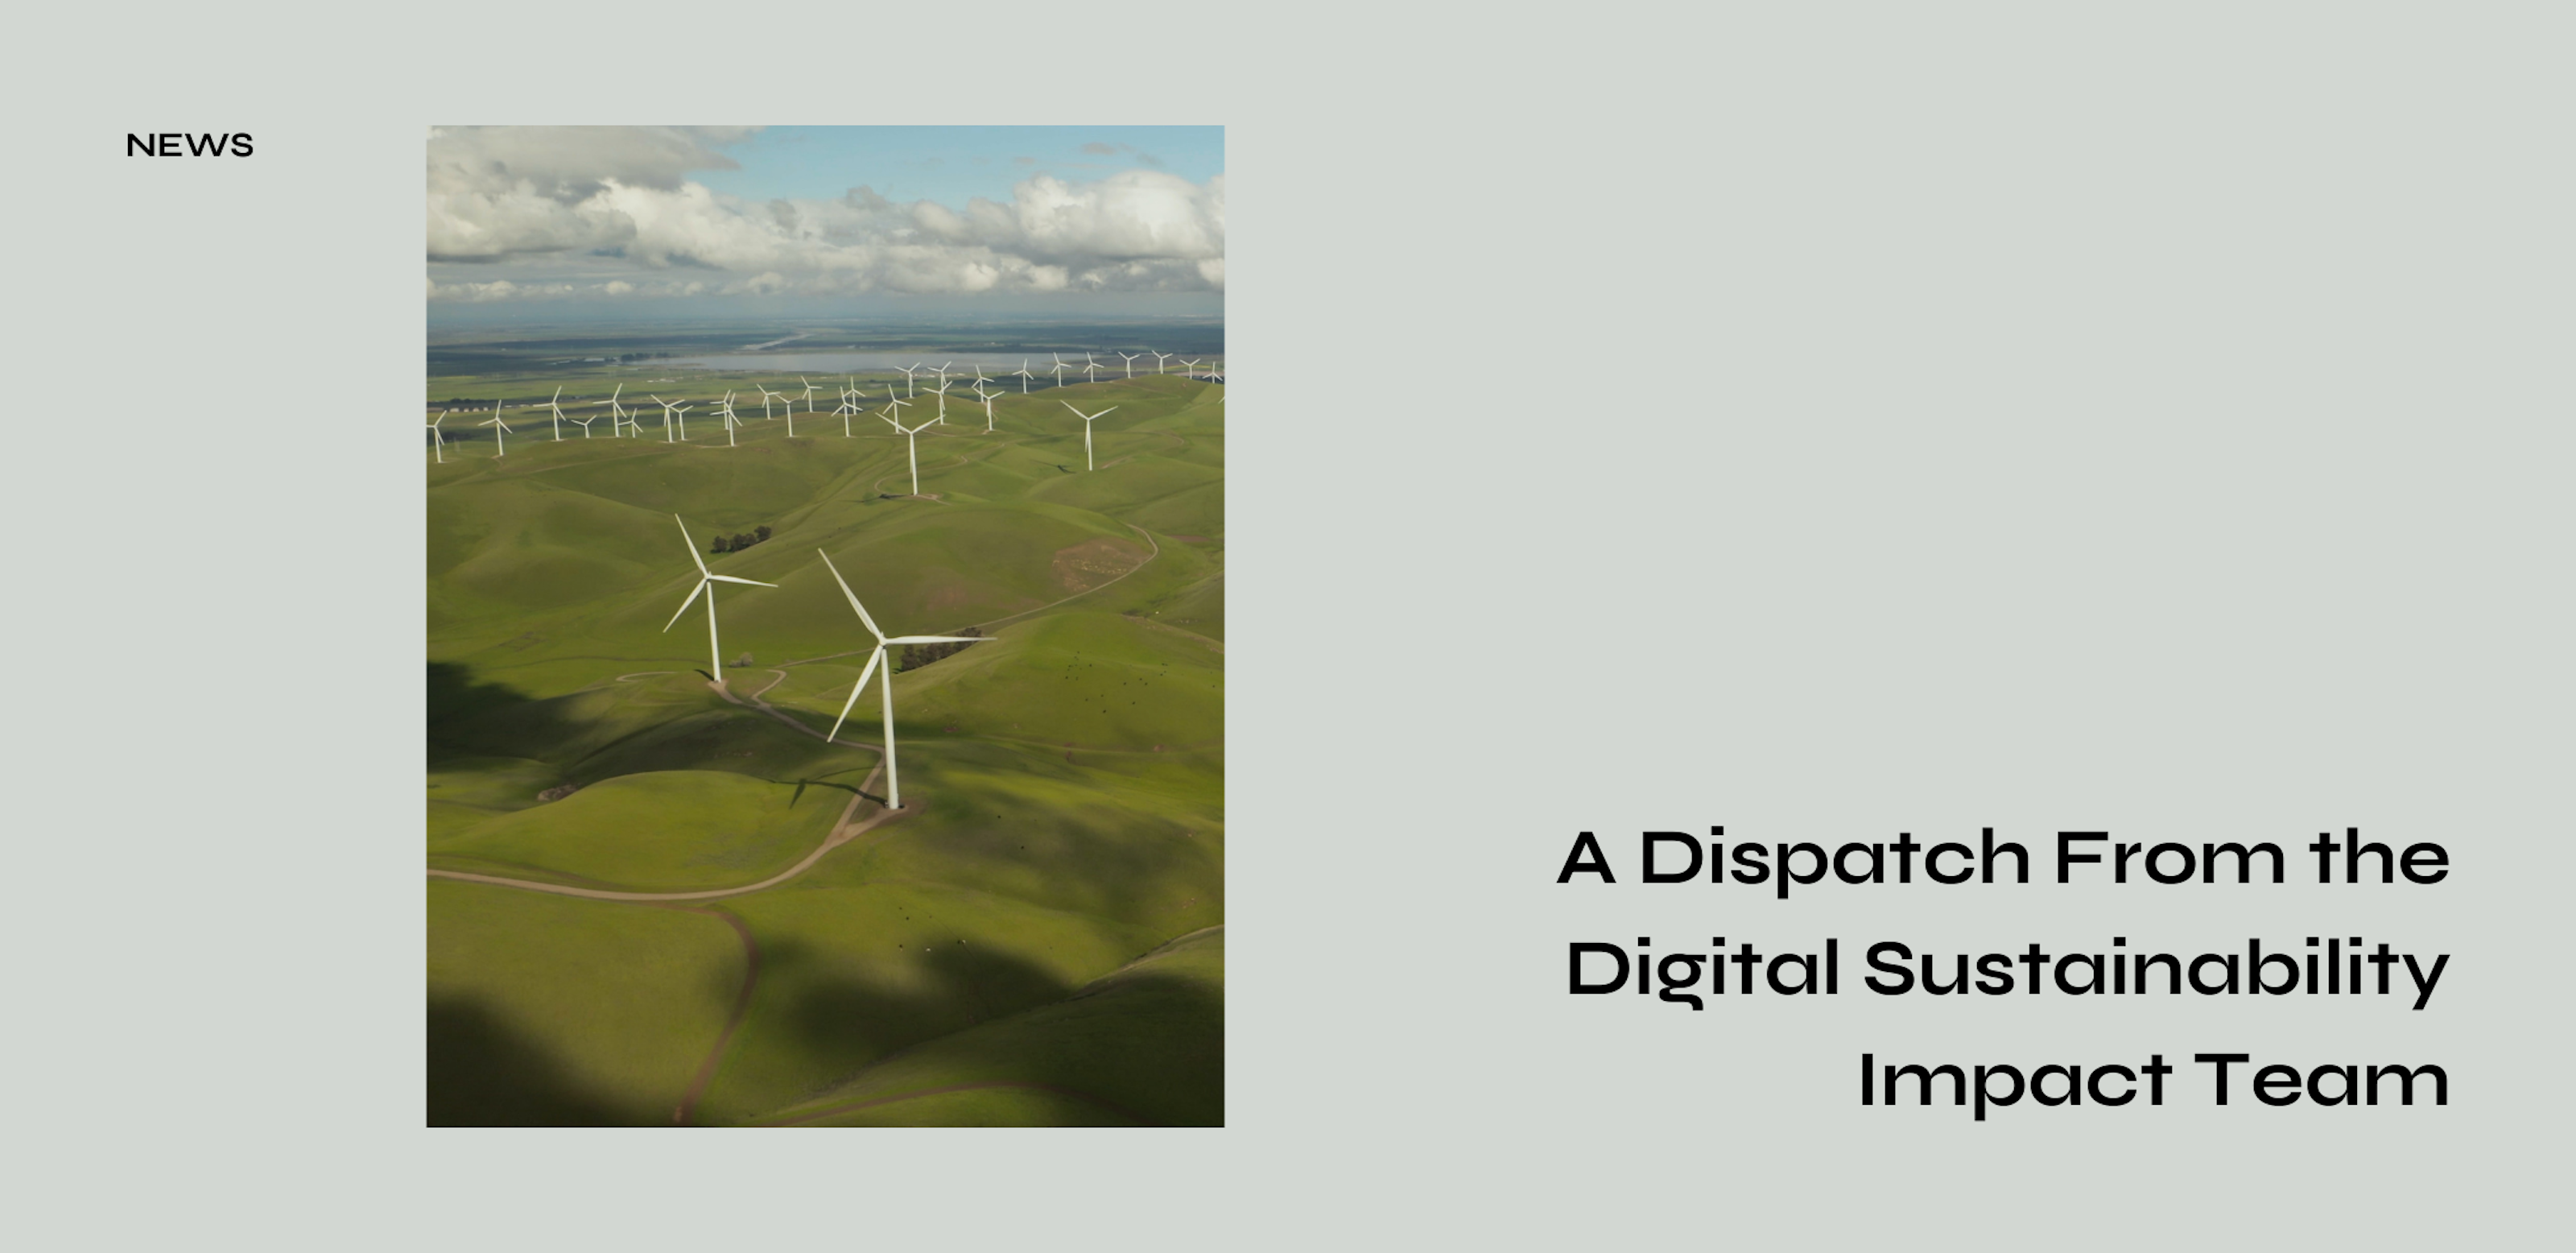 an image of windmills in a grassy field, text to the right of the image reads "A Dispatch From the Digital Sustainability Impact Team"